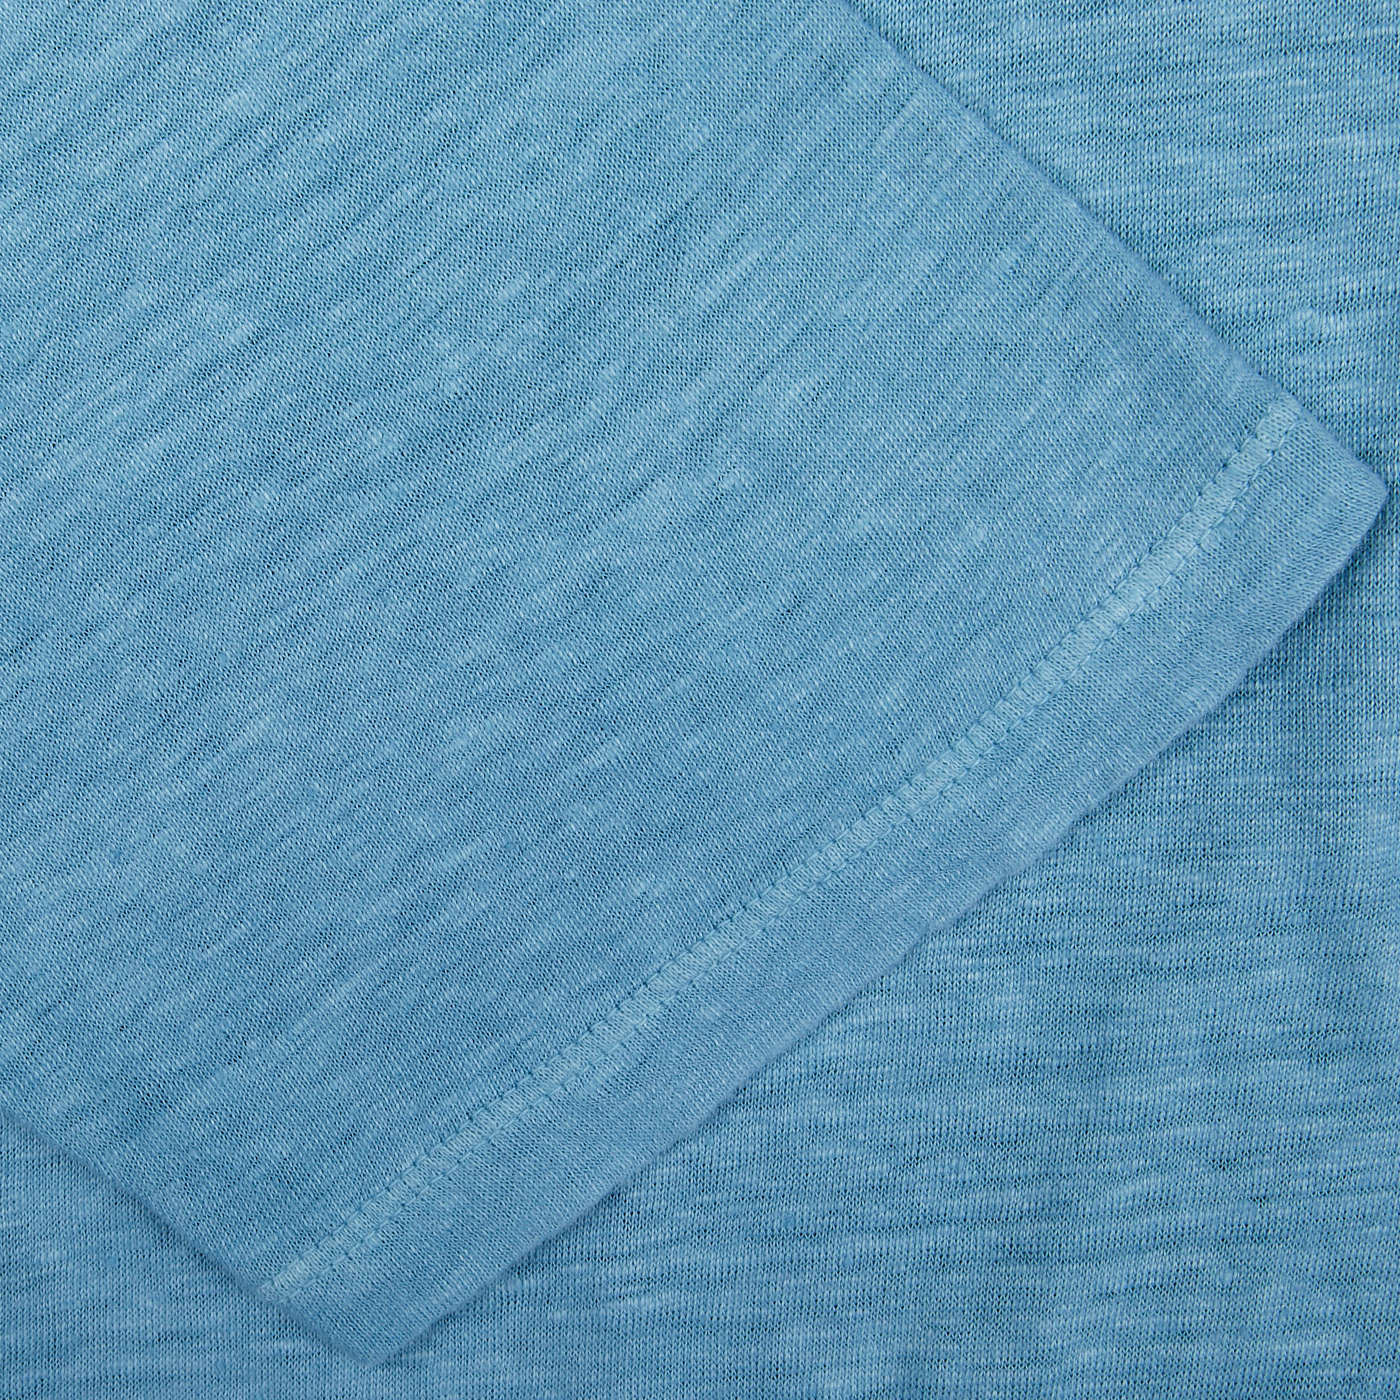 Aqua Blue Linen Polo Shirt from Massimo Alba, with a folded corner, dyed using natural chemical-free pigments.